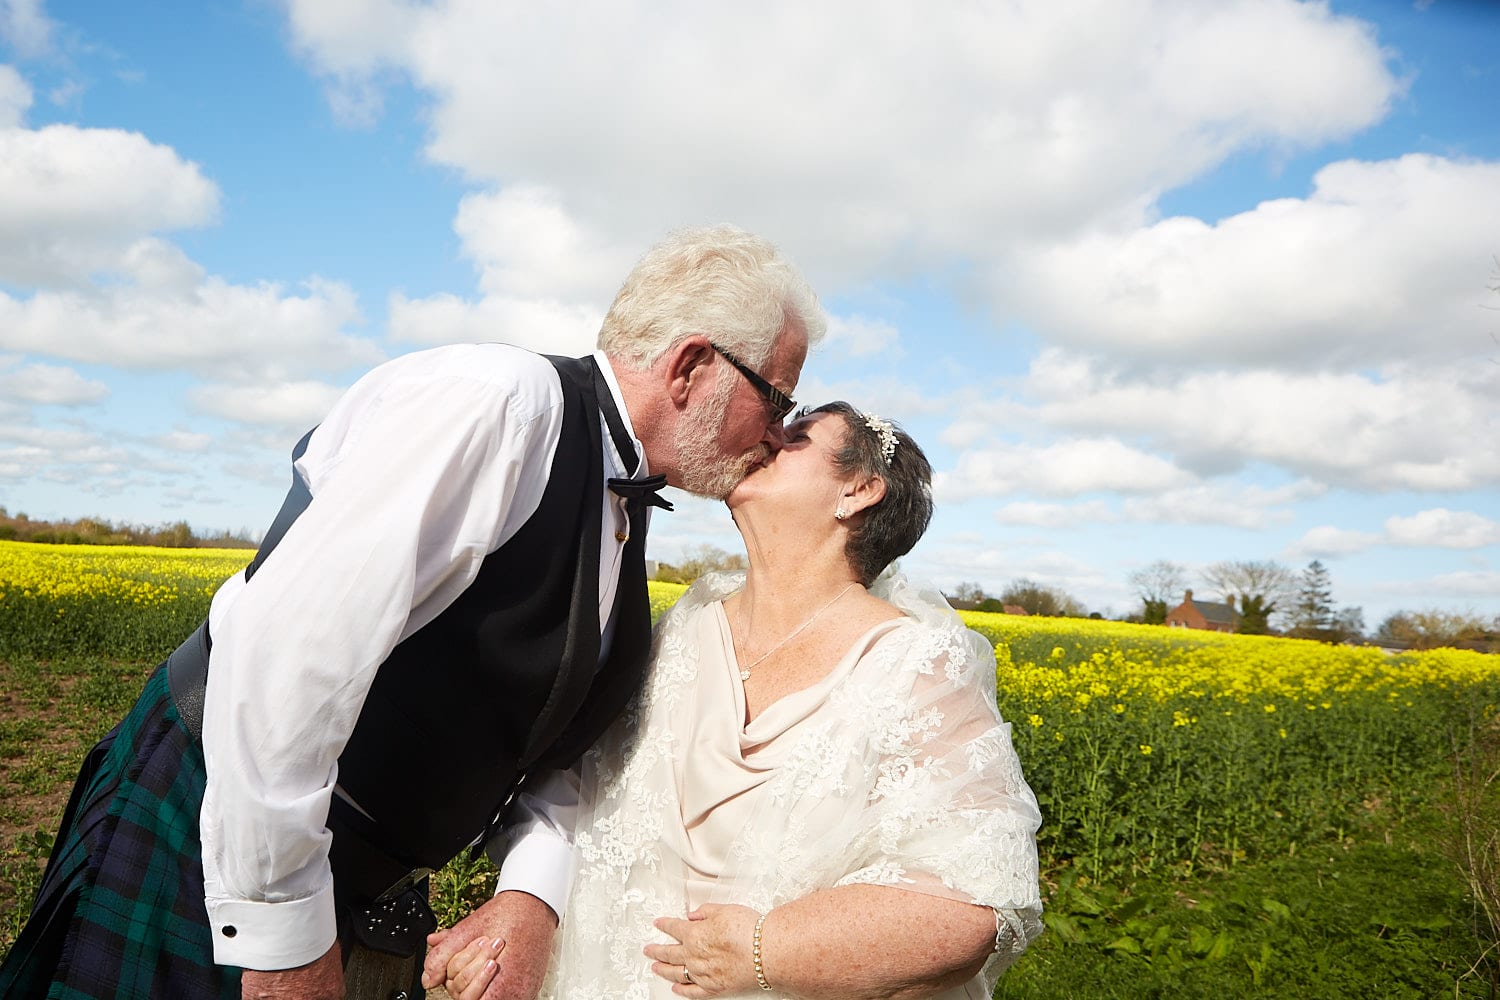 An older, just married couple kiss.